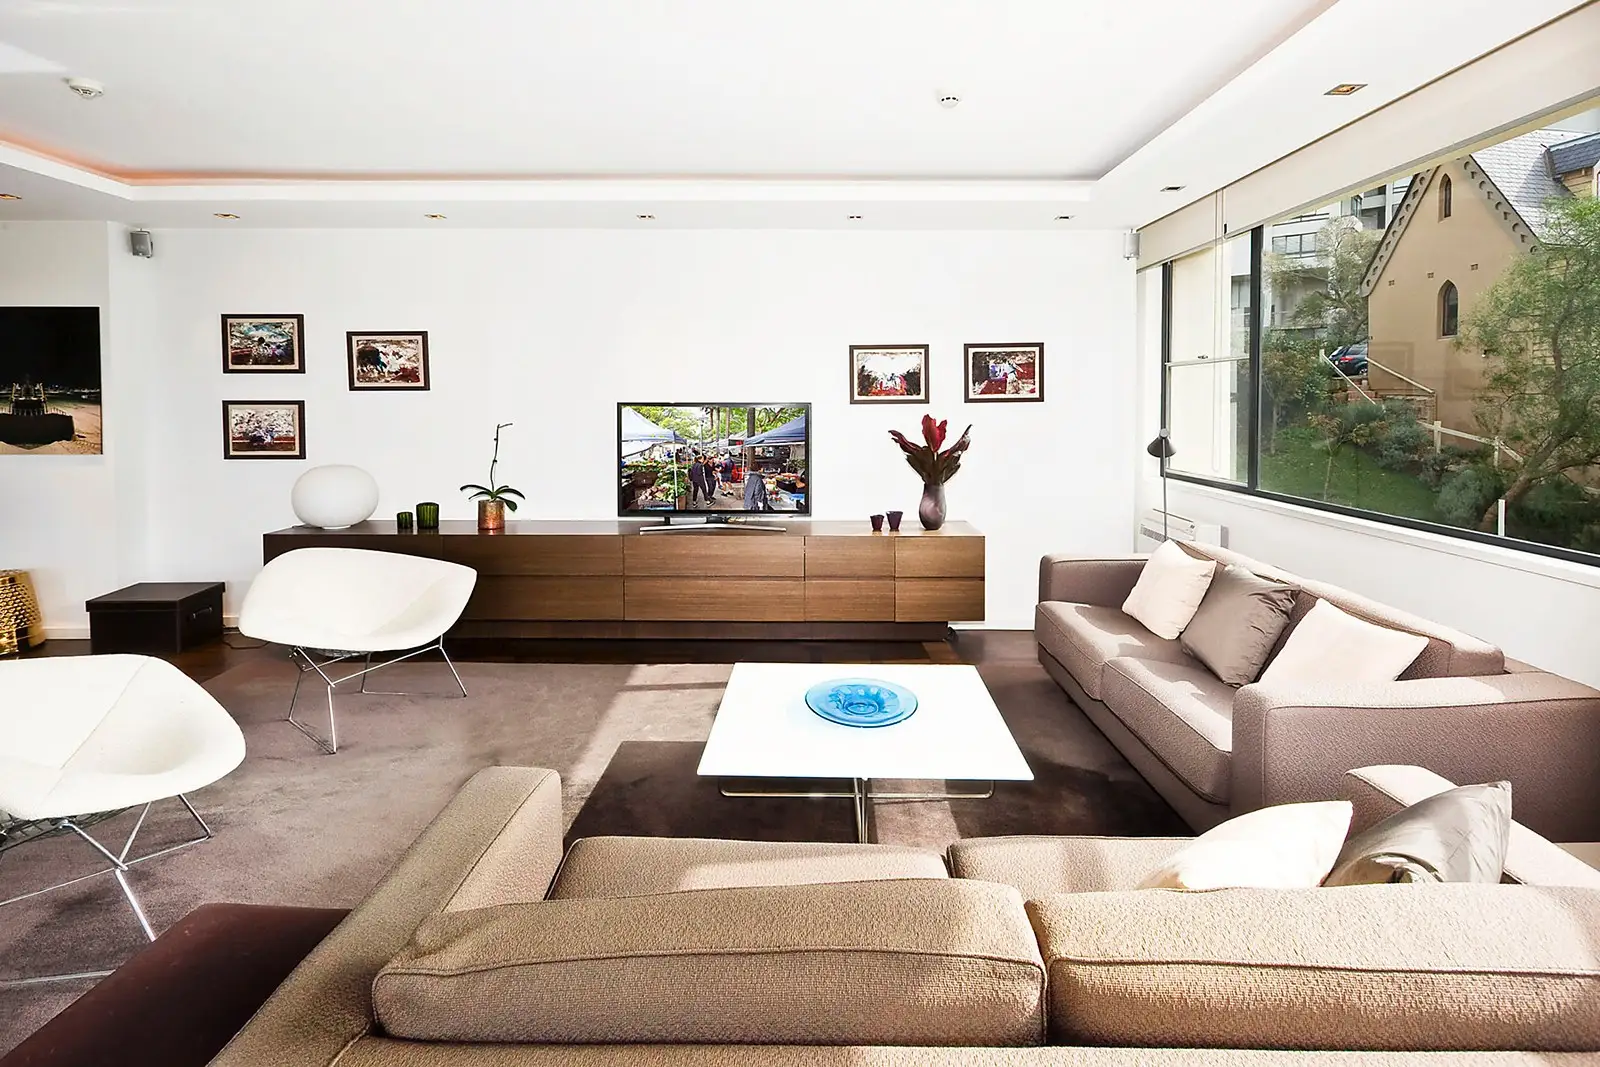 Photo #3: 2/4 Marathon Road, Darling Point - Sold by Sydney Sotheby's International Realty